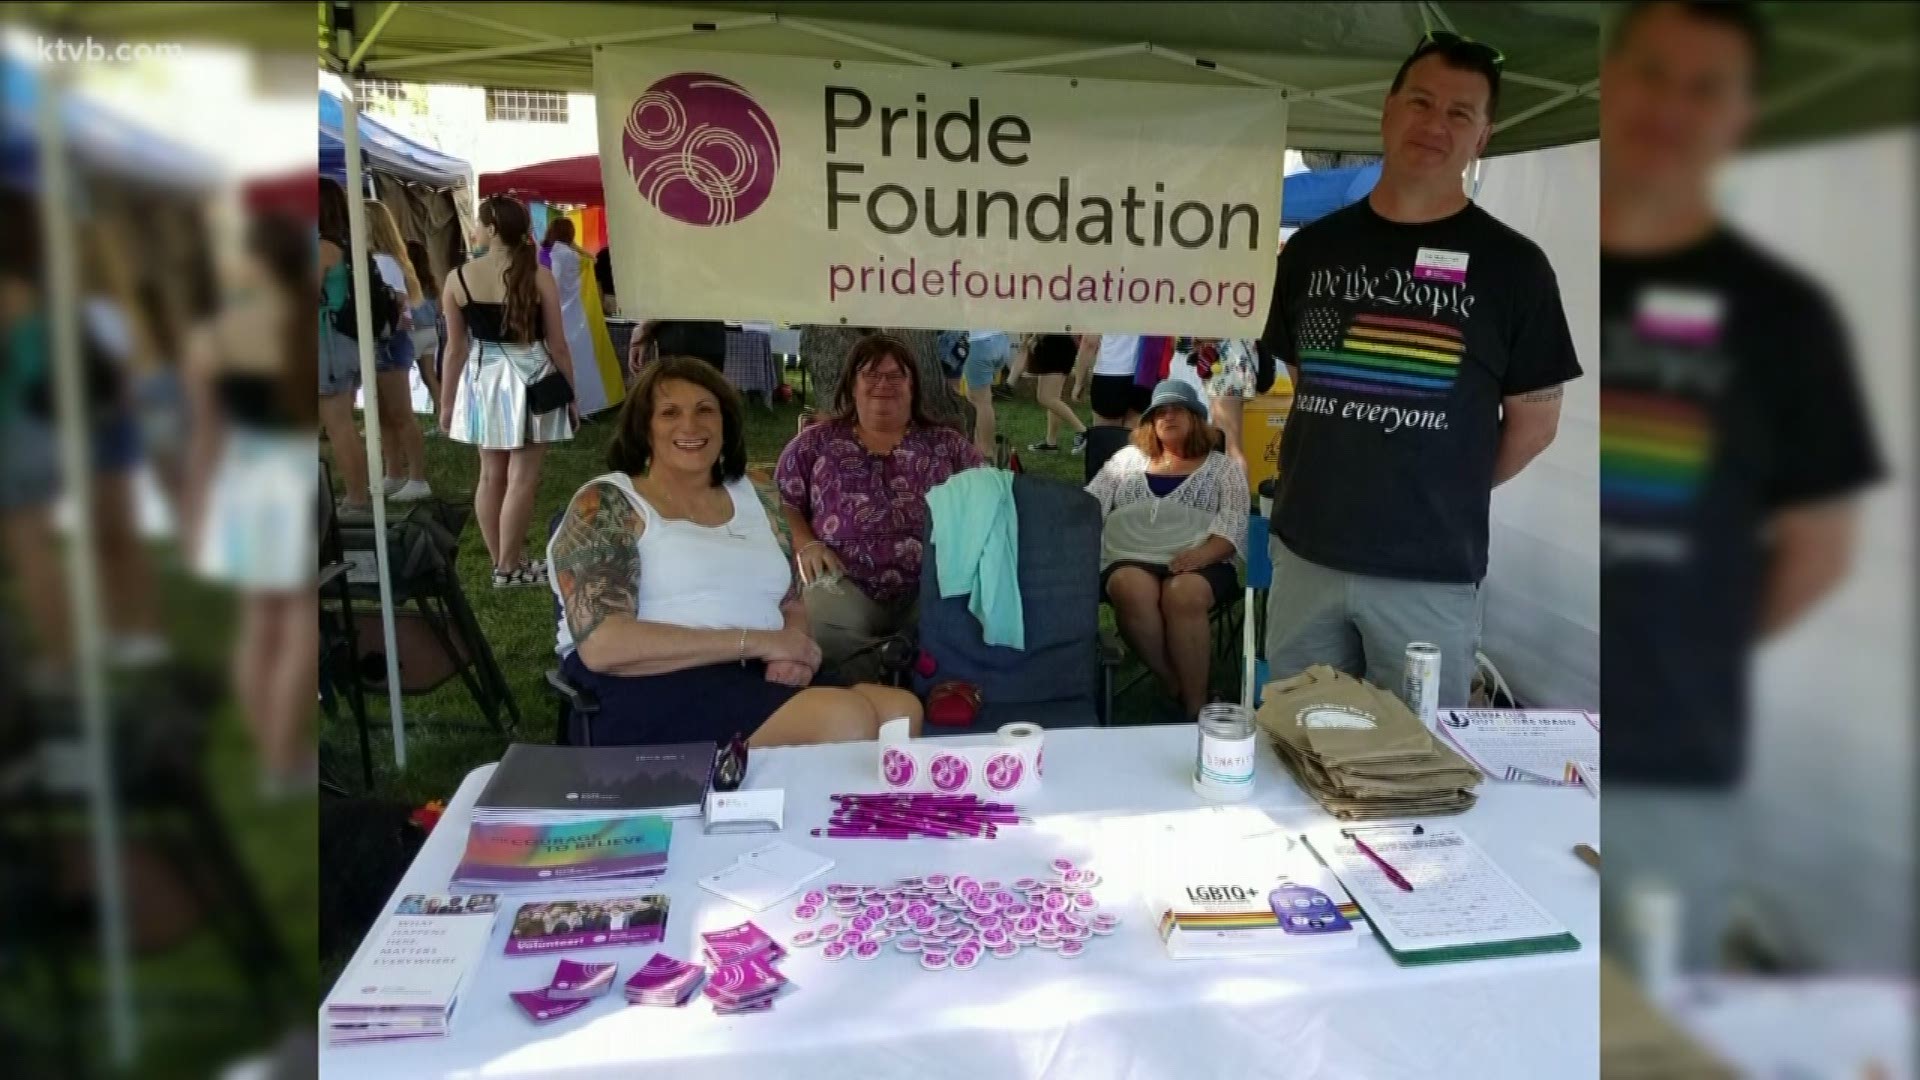 The foundation focuses on LGBTQ issues in Idaho.